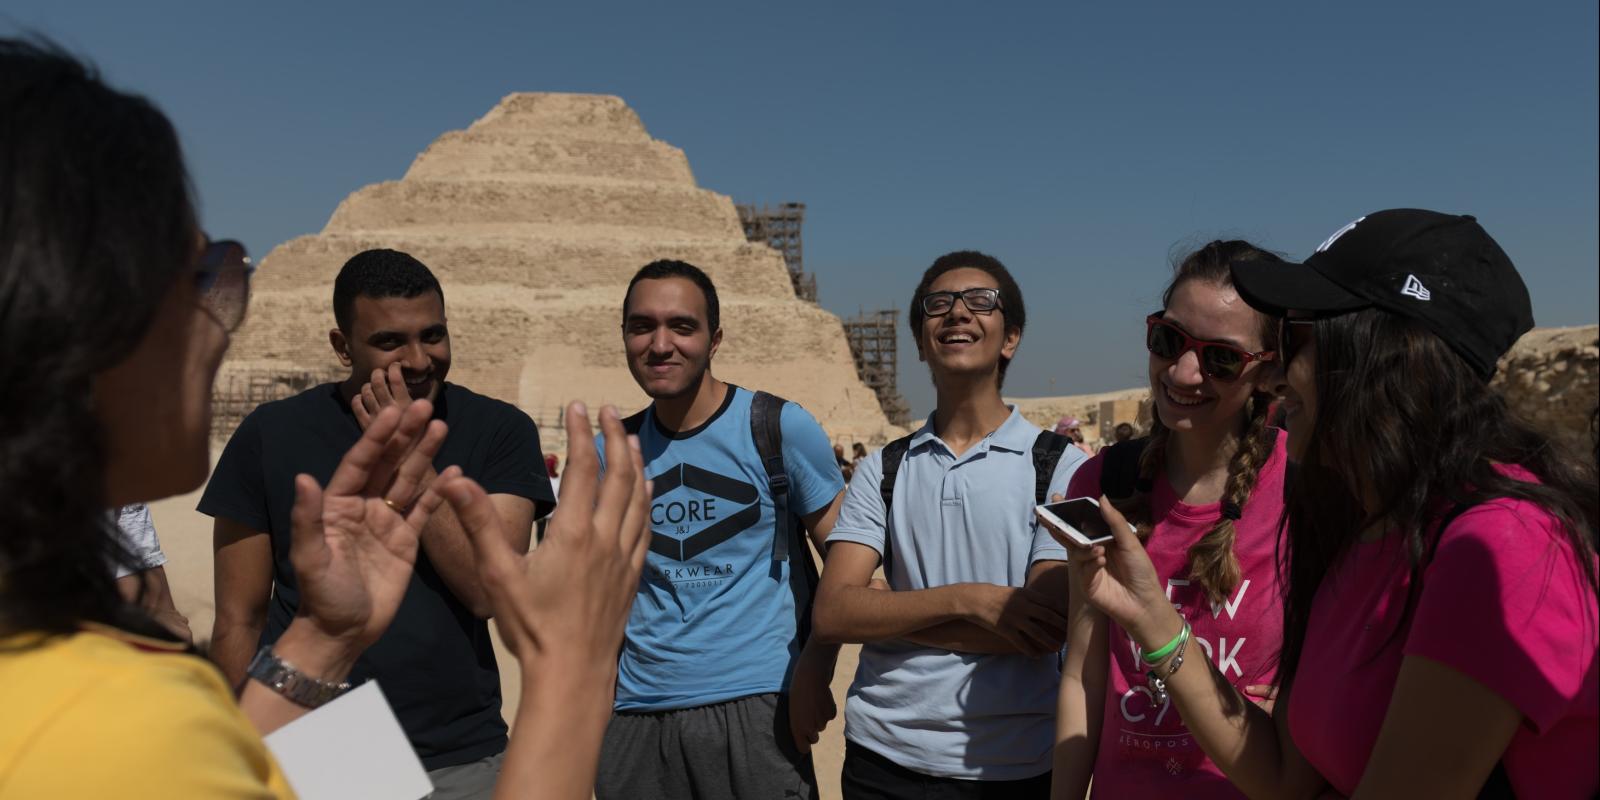 The students during their visit to Saqqara